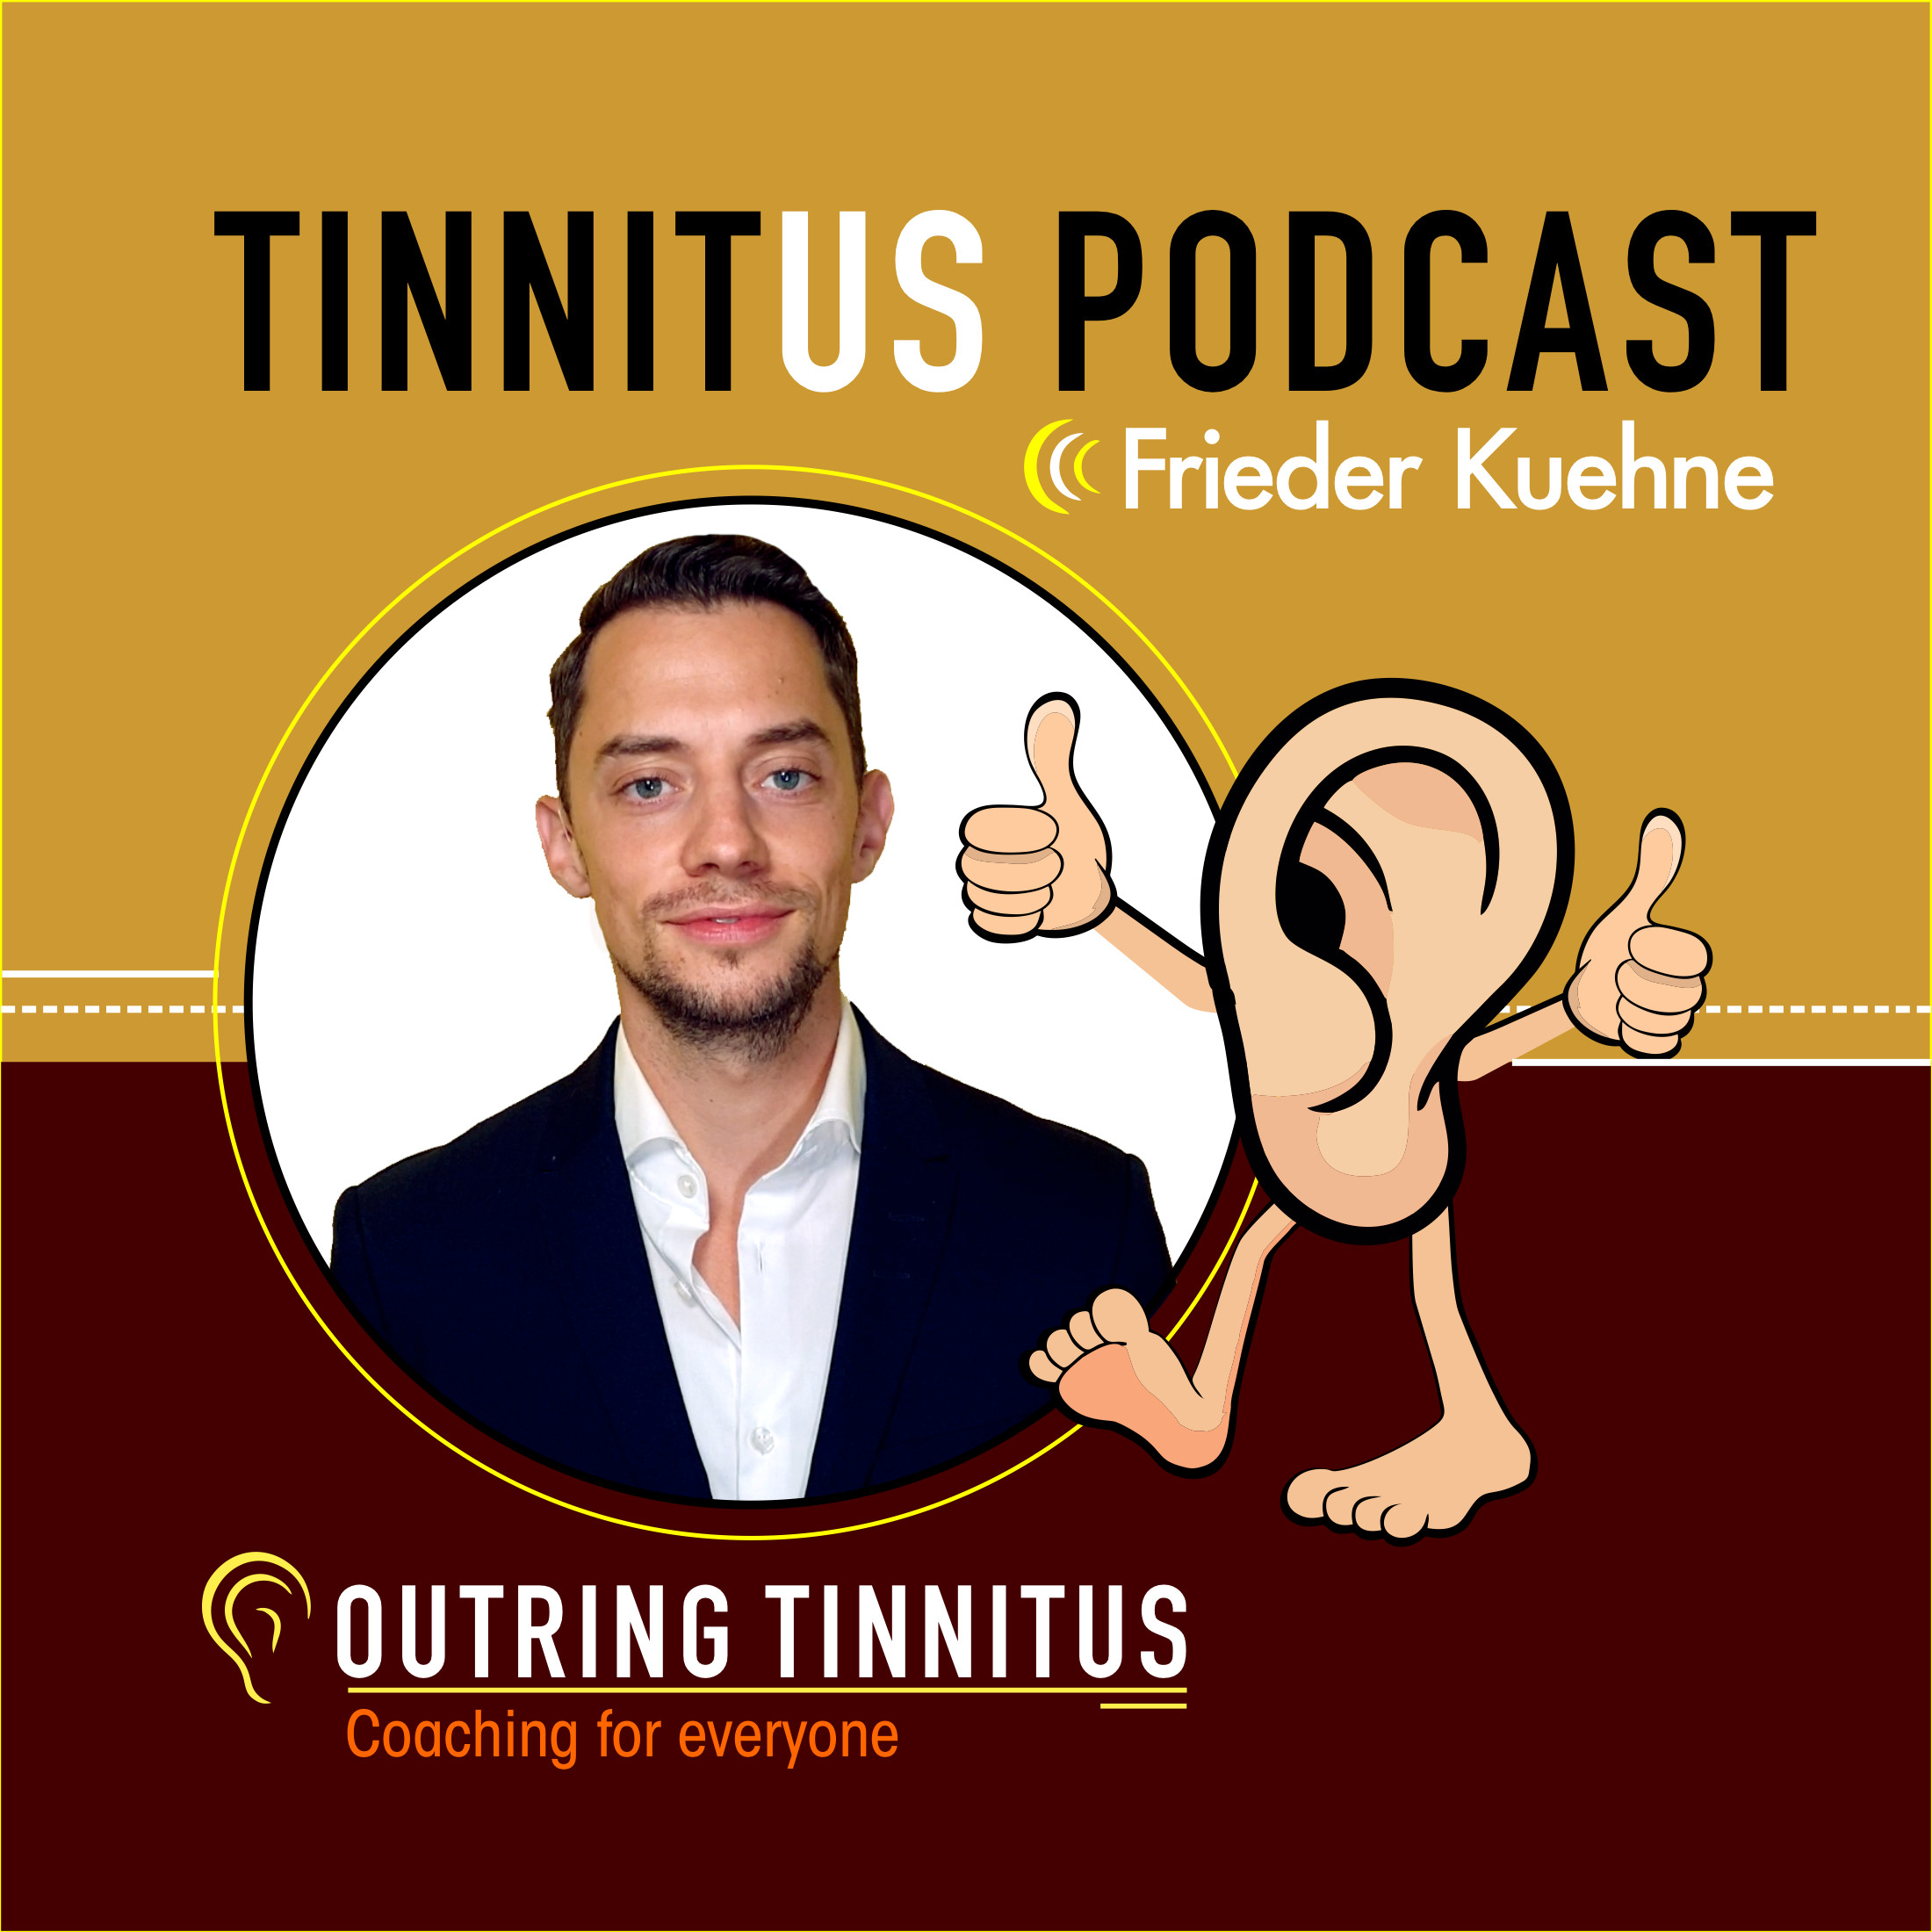 You are currently viewing Episode 8 – Tips and Insights from the Outring Tinnitus Podcast